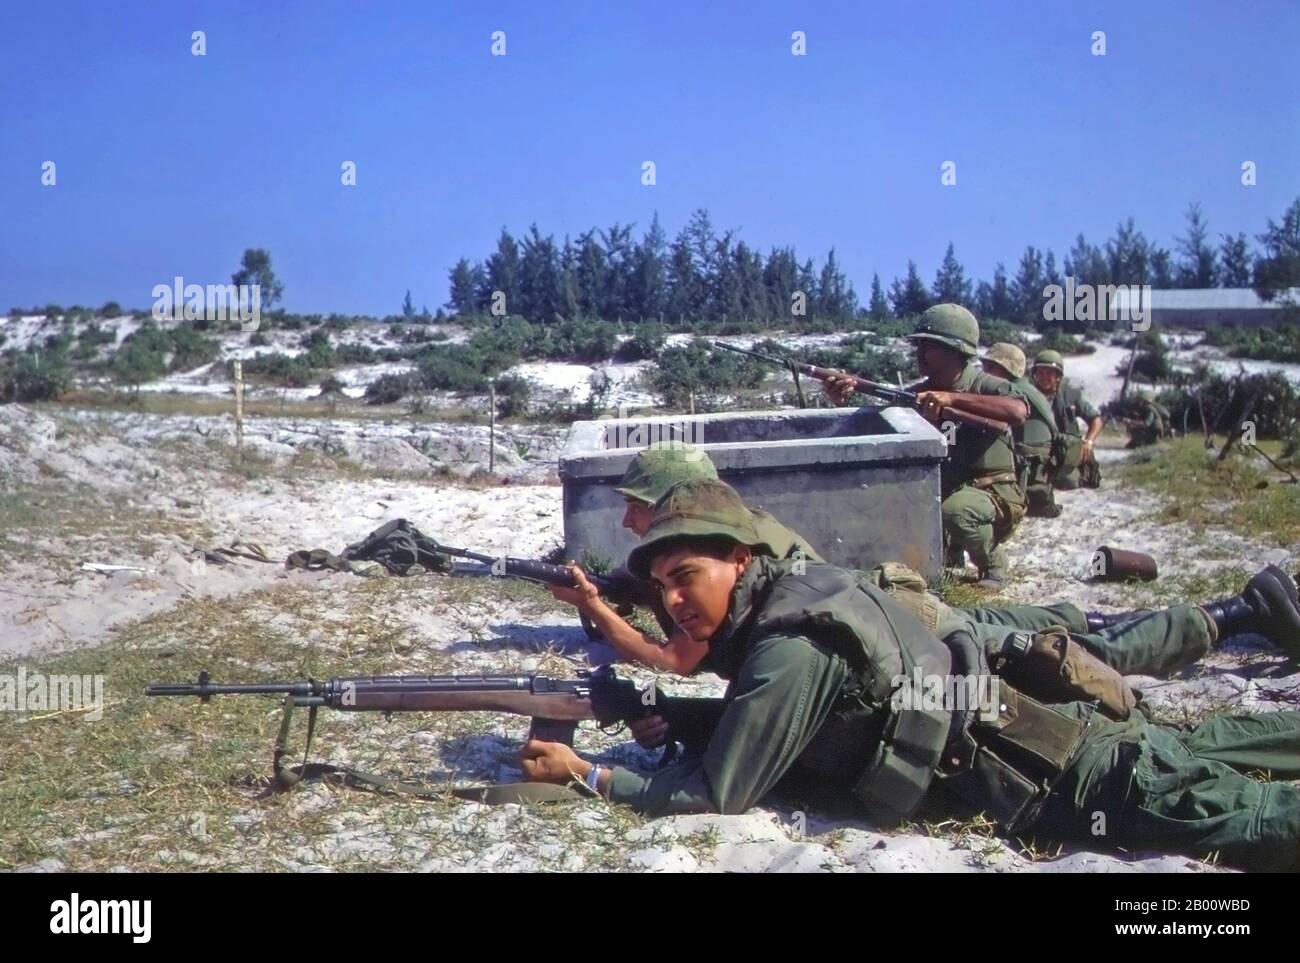 Vietnam: Hue, Tet Offensive, U.S. Marines battle in Hamo village, 1968.  The Second Indochina War, known in America as the Vietnam War, was a Cold War era military conflict that occurred in Vietnam, Laos, and Cambodia from 1 November 1955 to the fall of Saigon on 30 April 1975. This war followed the First Indochina War and was fought between North Vietnam, supported by its communist allies, and the government of South Vietnam, supported by the U.S. and other anti-communist nations. Stock Photo